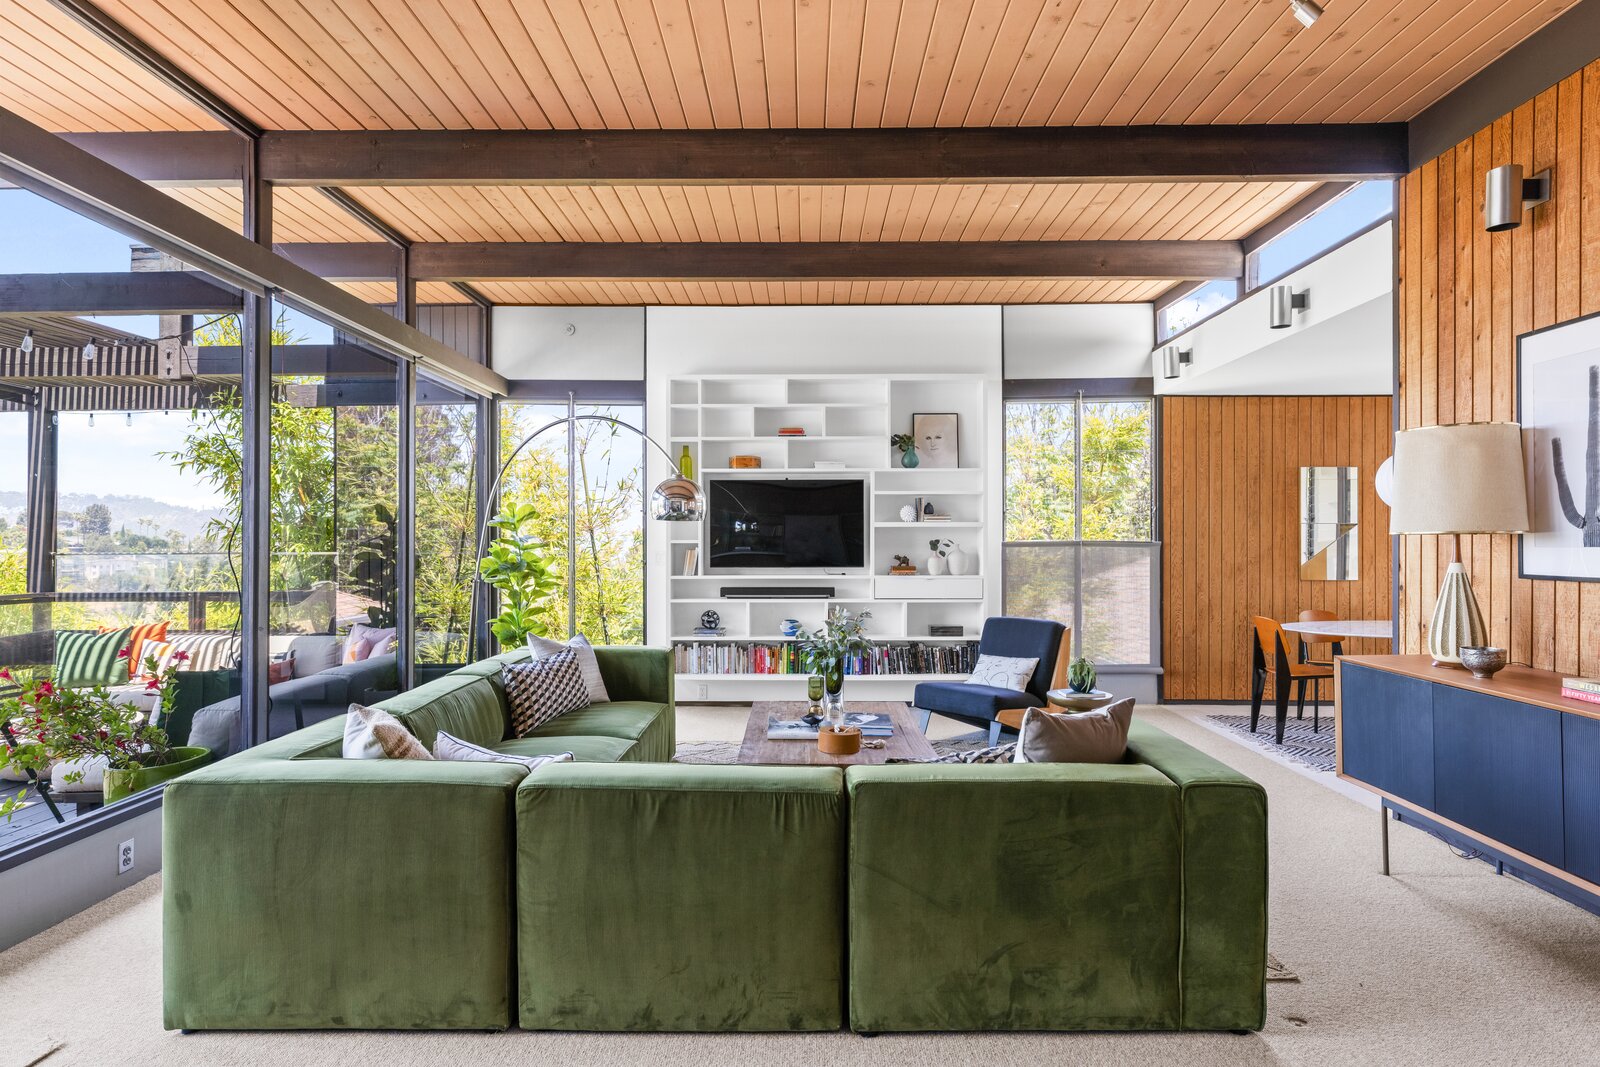 An Architect’s Midcentury Home With Beaming Interiors in L.A.